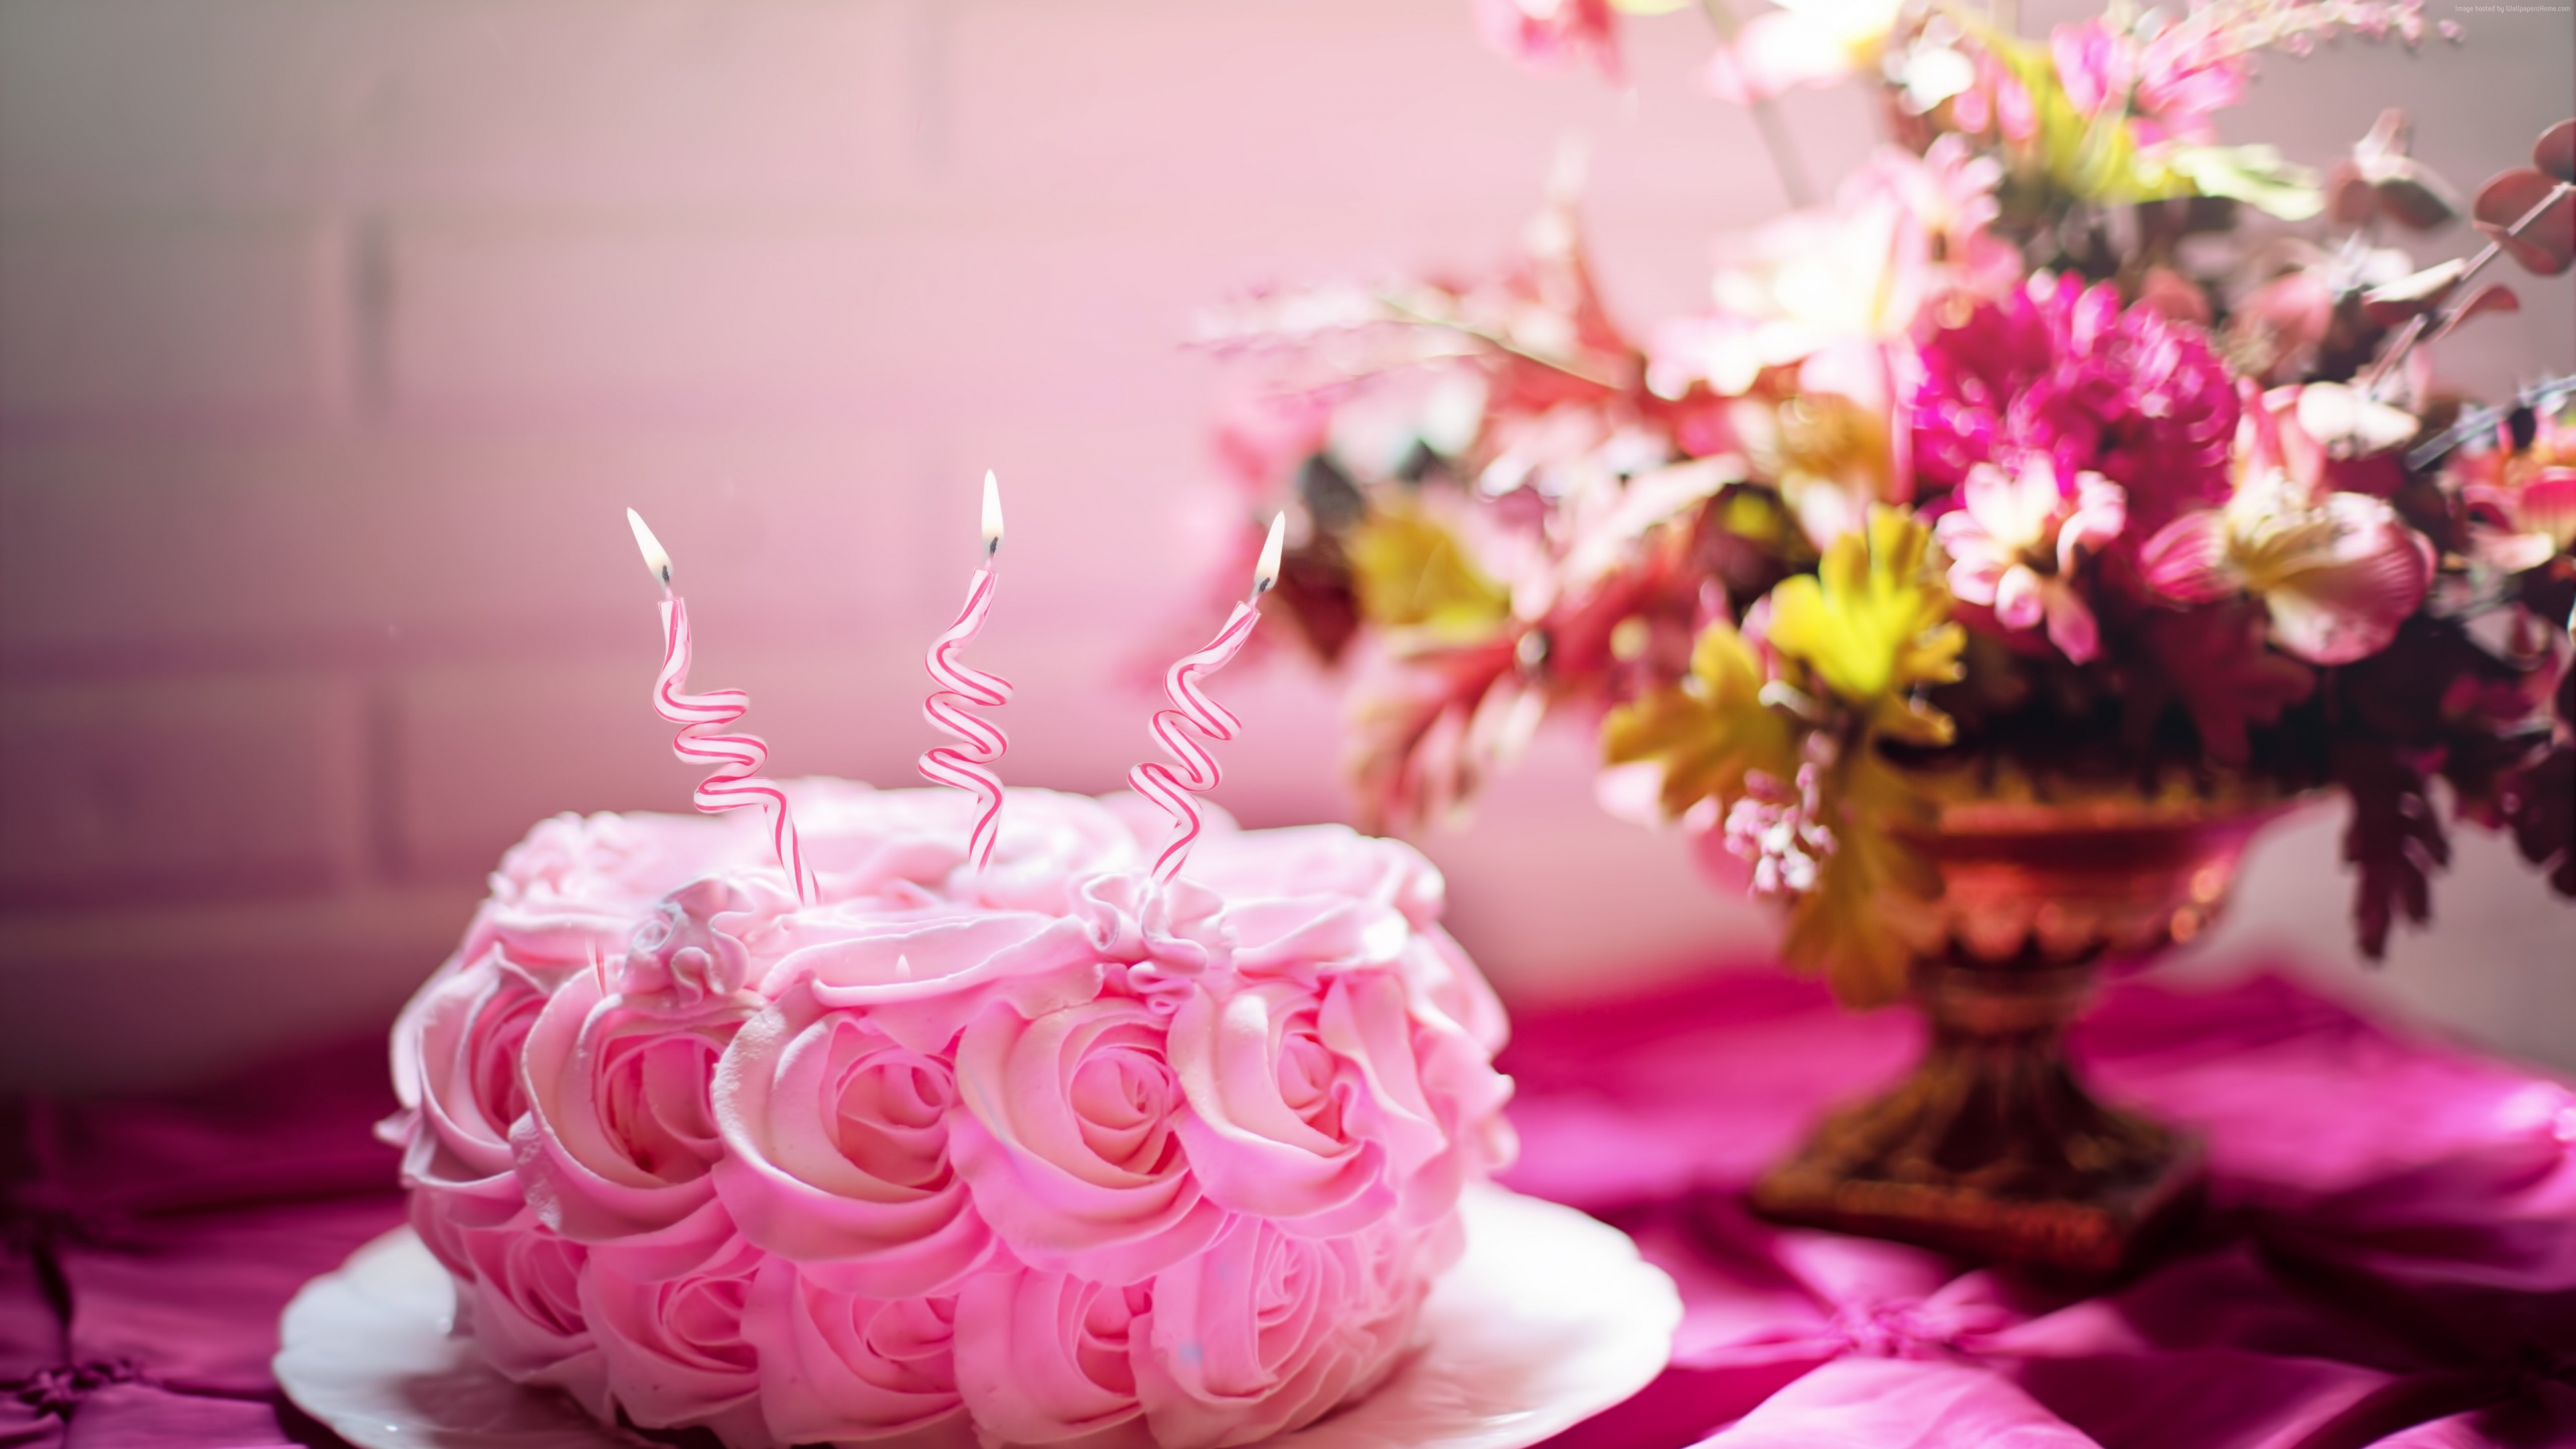 Icing, Birthday Cake, Cake Decorating, Pink, Sweetness. Wallpaper in 3840x2160 Resolution